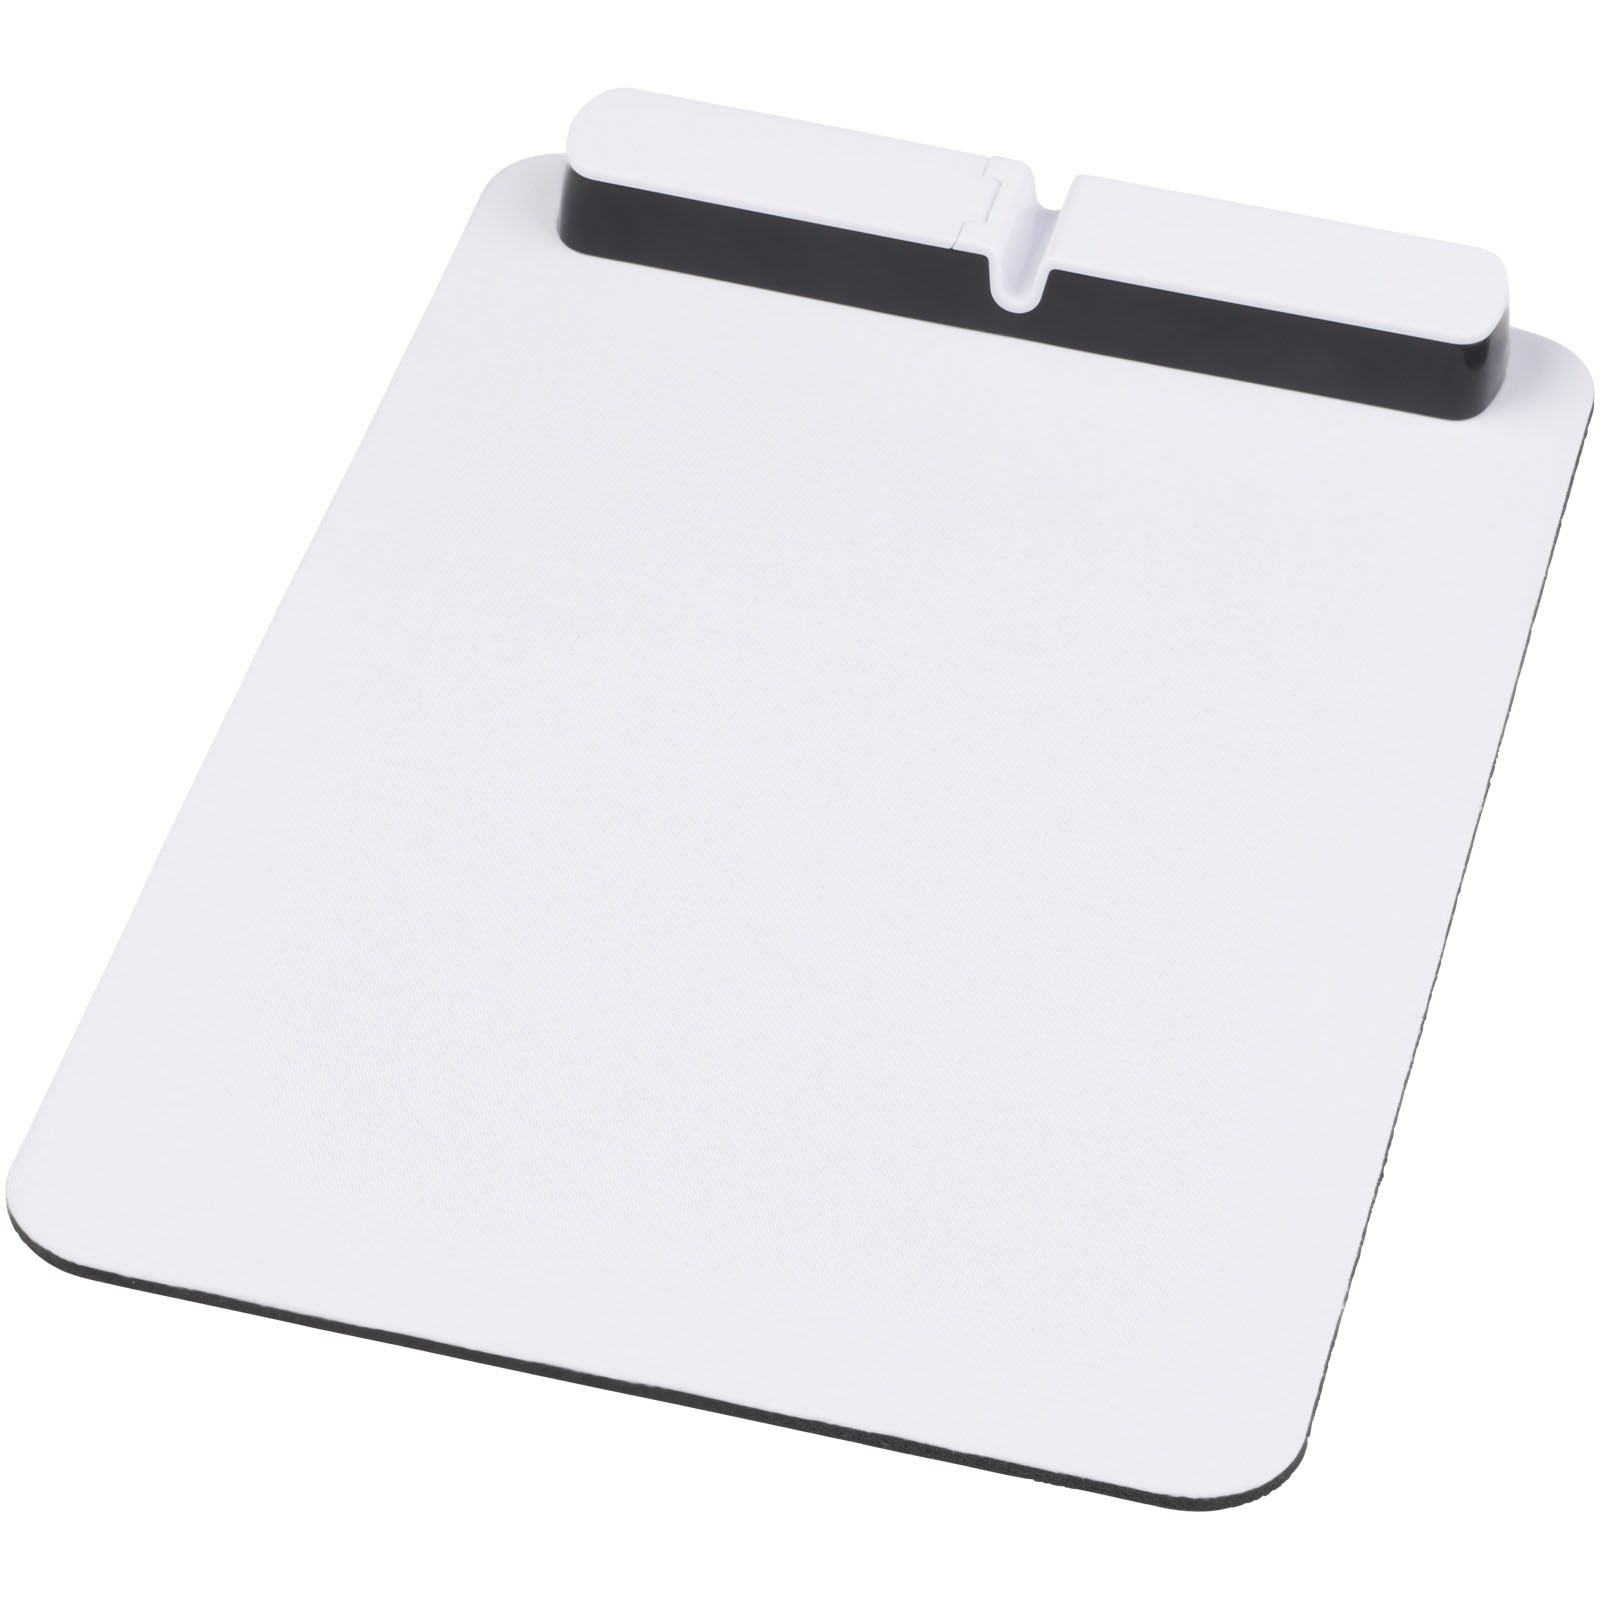 Cache mouse pad with USB hub - White